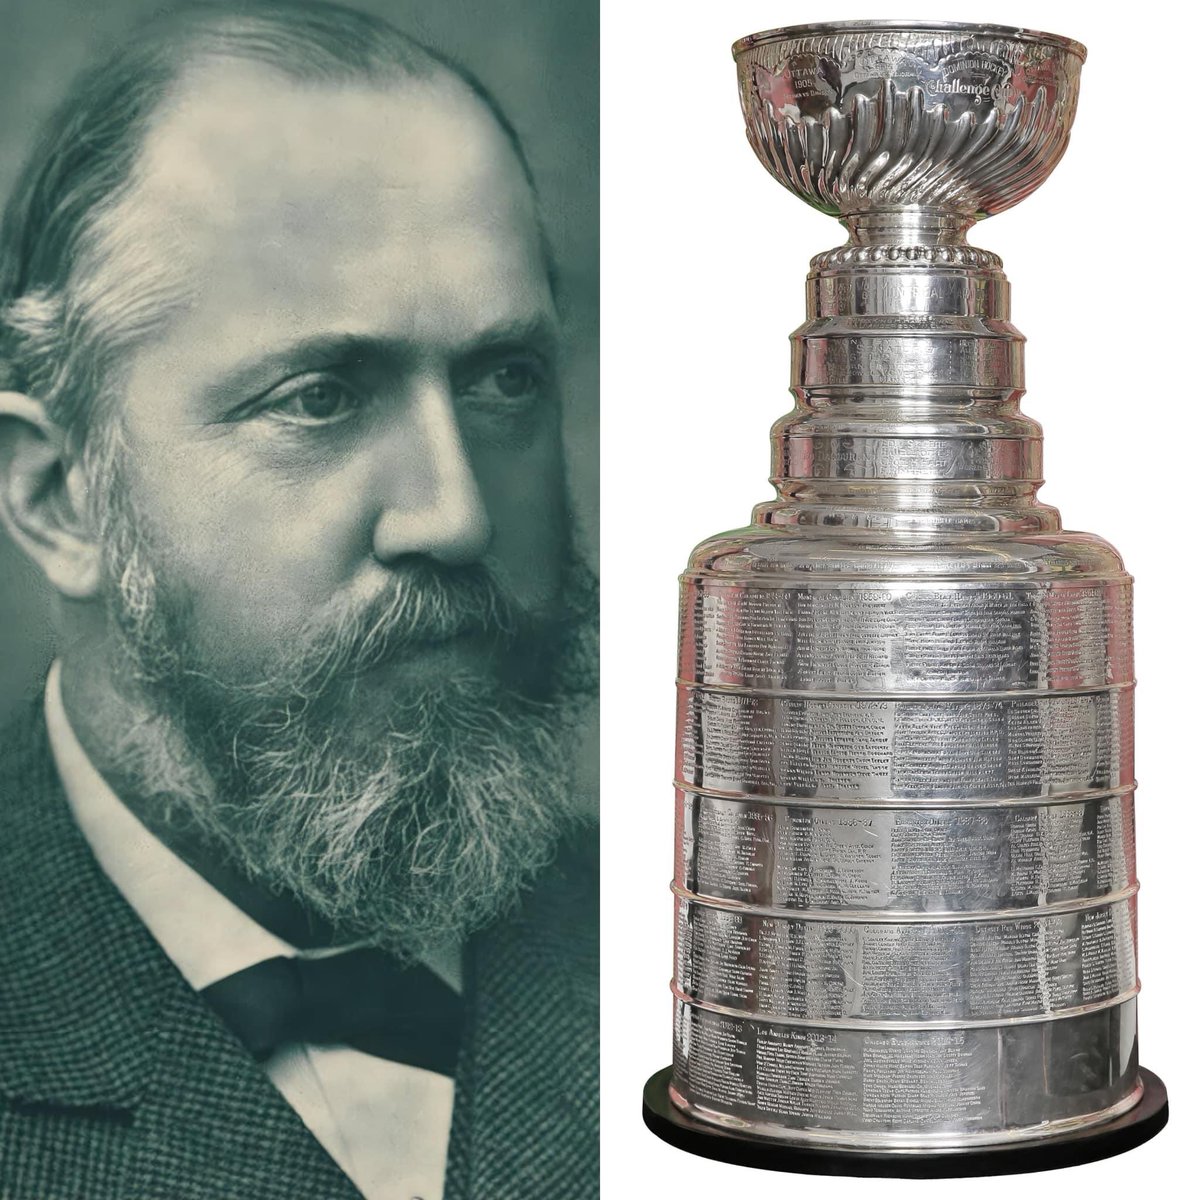 In 1892 former Governor General of Canada, Frederick Arthur Stanley(Lord Stanley of Preston), donated a championship hockey trophy known as the “Dominion Hockey Challenge Cup” to be given to Canada’s top ranking amateur ice hockey club. Now known as the Stanley Cup. Vancouver’s…